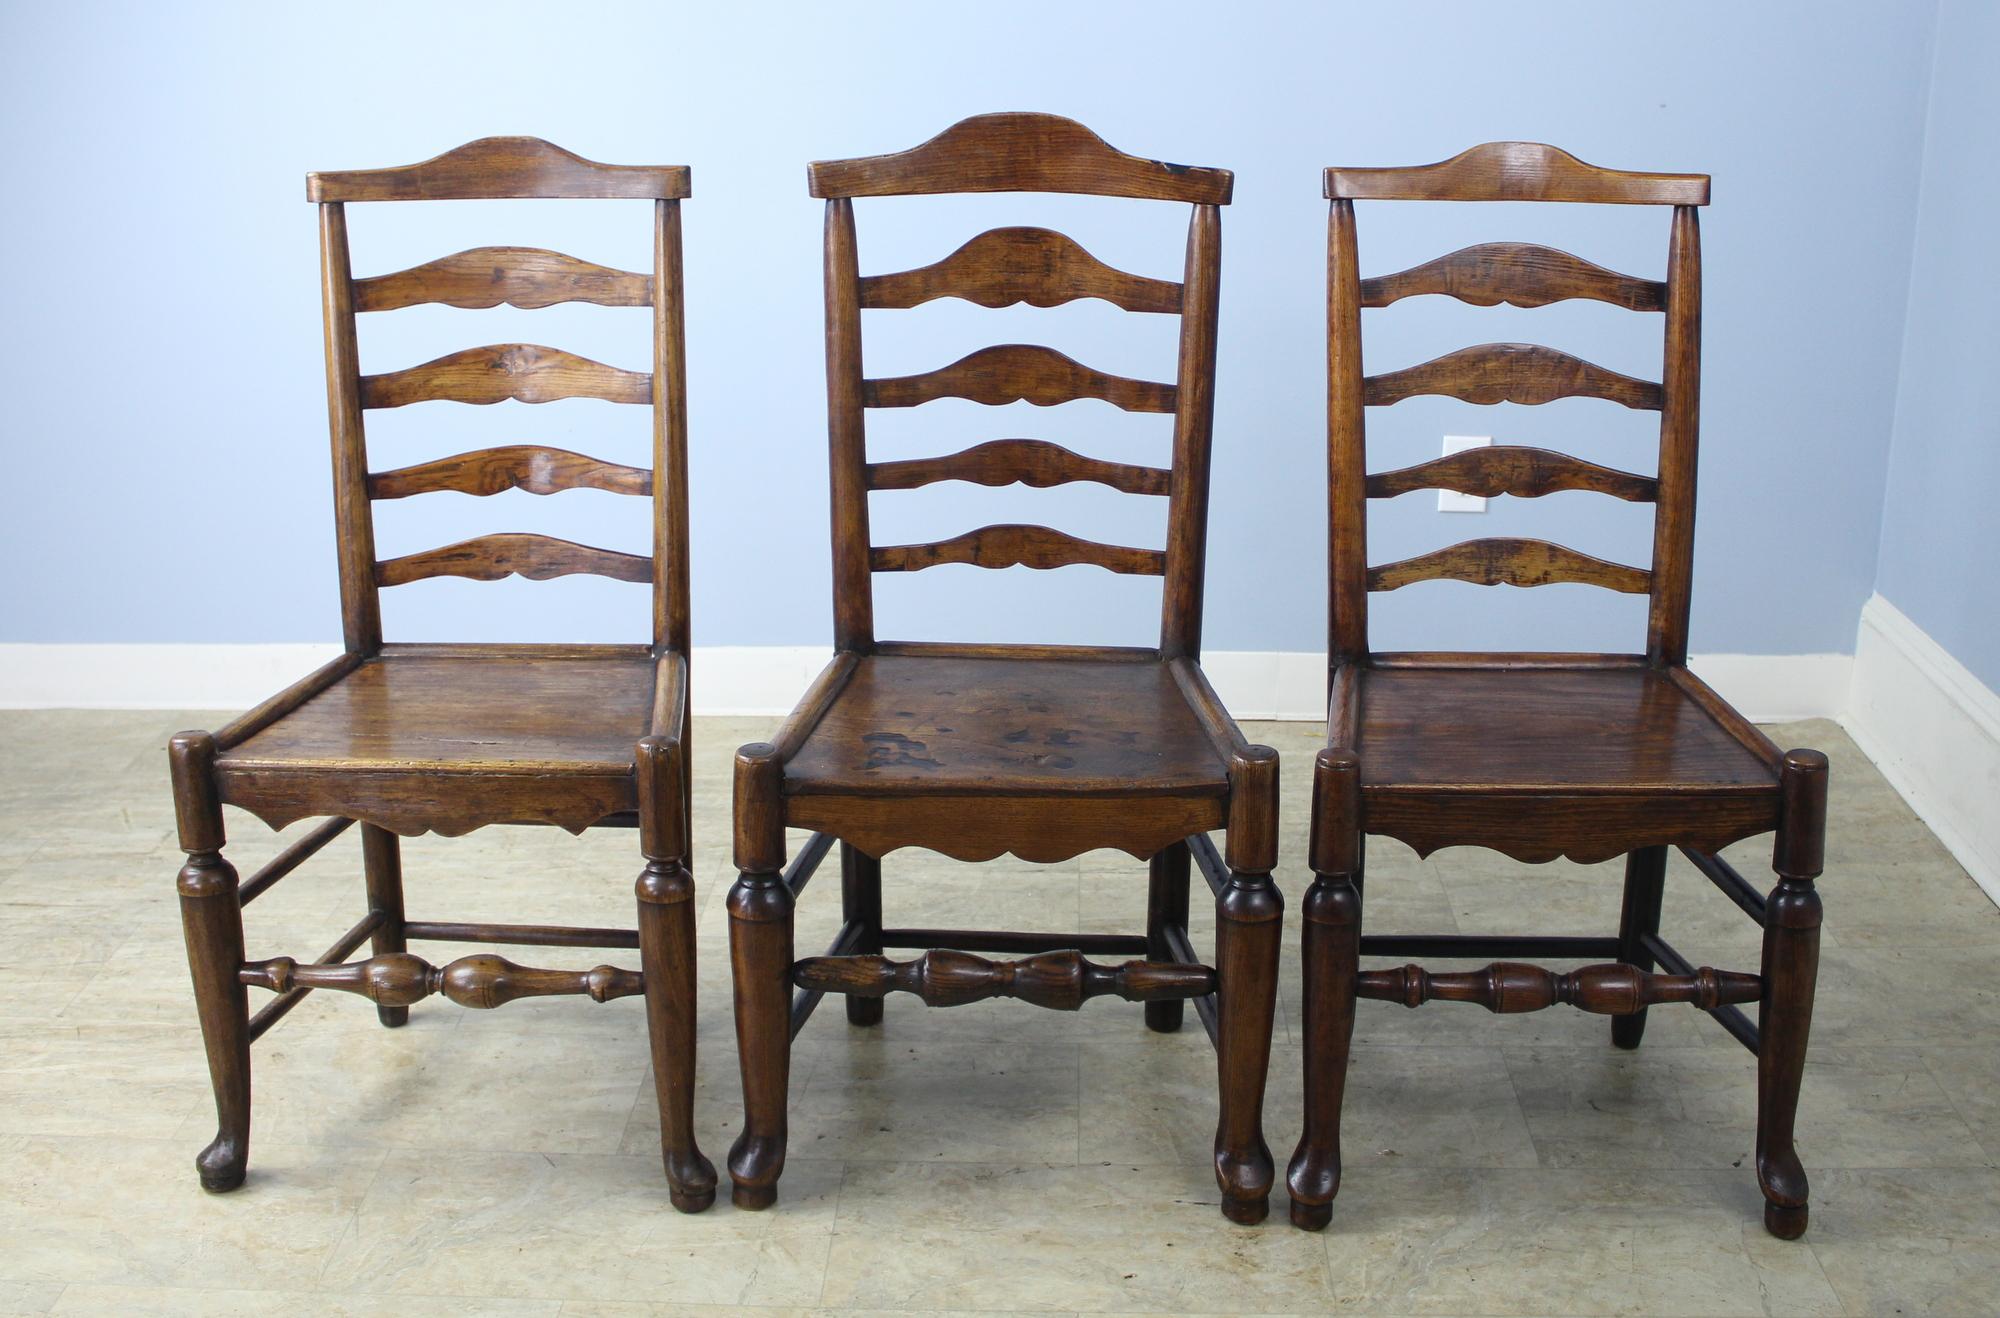 A splendid set of six handmade 18th century oak and ash dining chairs, with great patina and nice curved ladderbacks. Due to their age, each chair has slightly different wear patterns and profiles. See here a sampling of three of the set, and notice